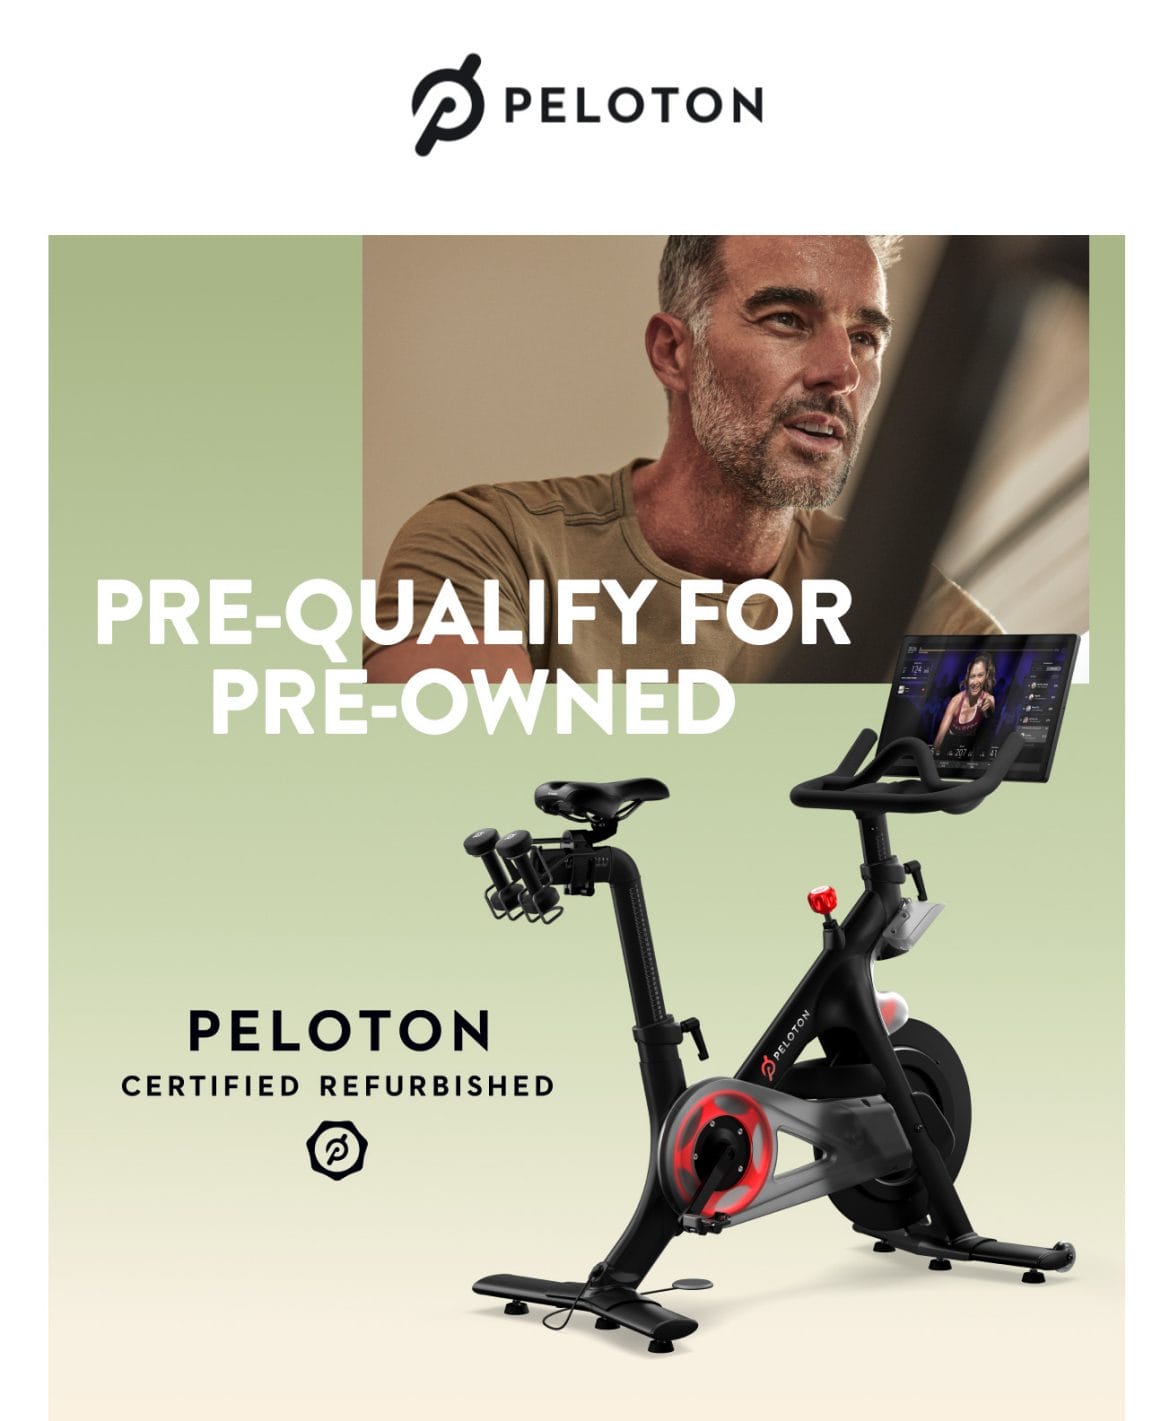 Peloton email to customers announcing financing for refurbished bikes.